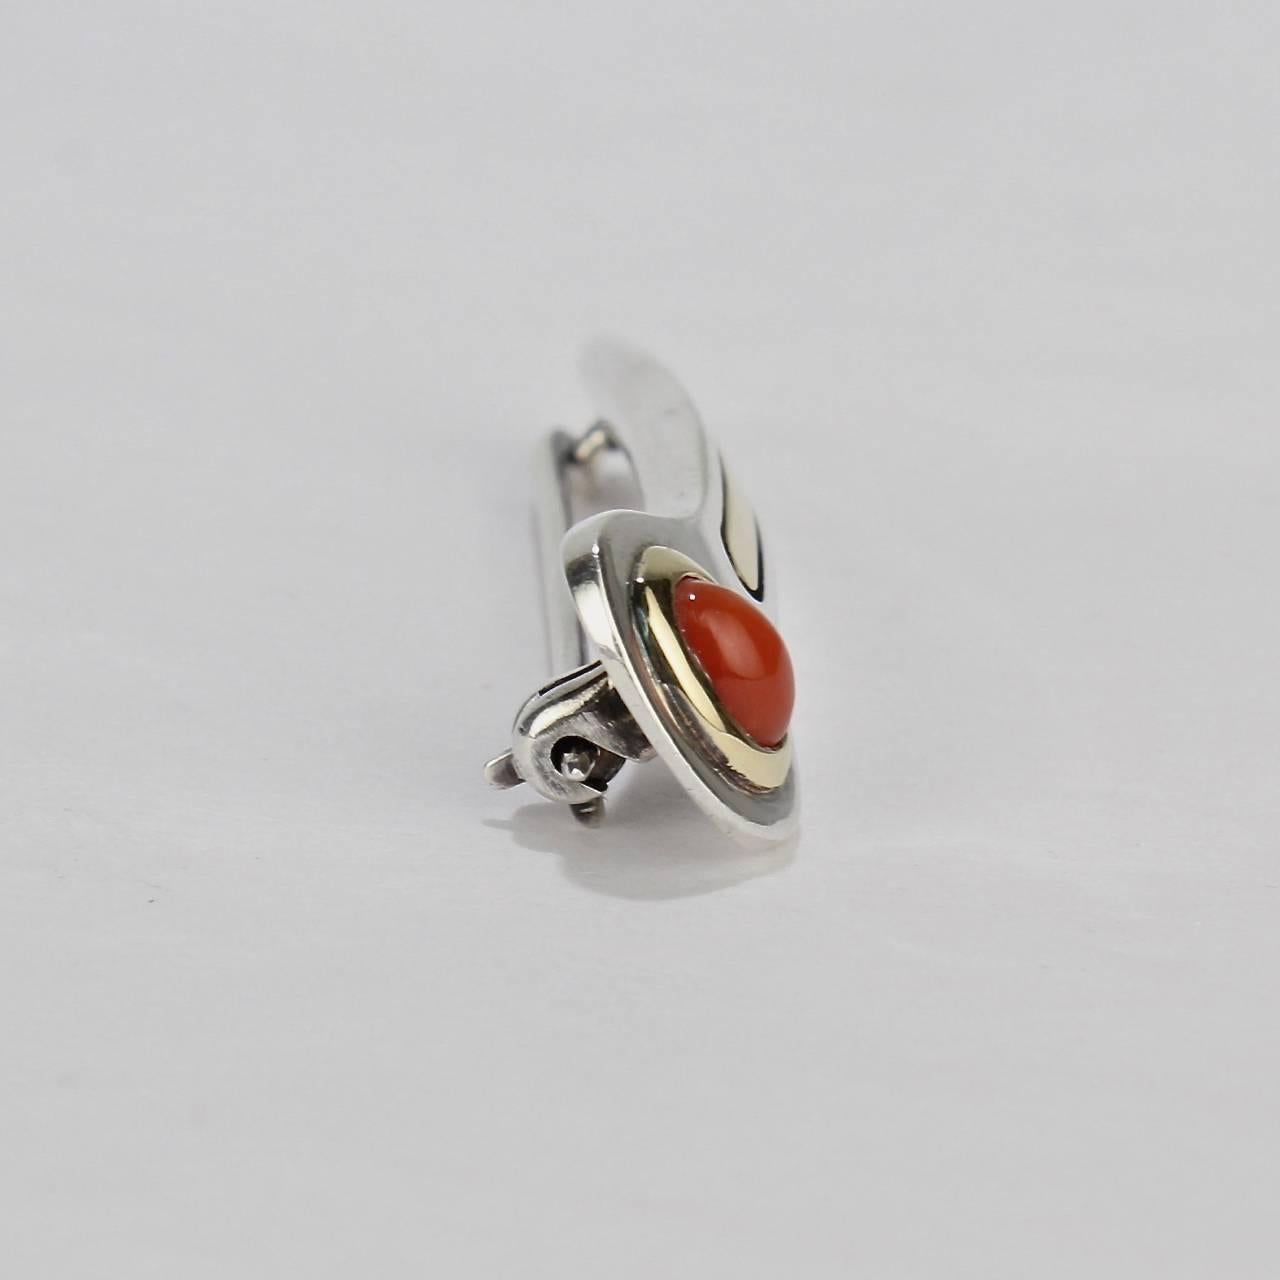 Modernist Cartier Sterling Silver, 18-Karat Gold and Red Coral Lapel Pin or Brooch